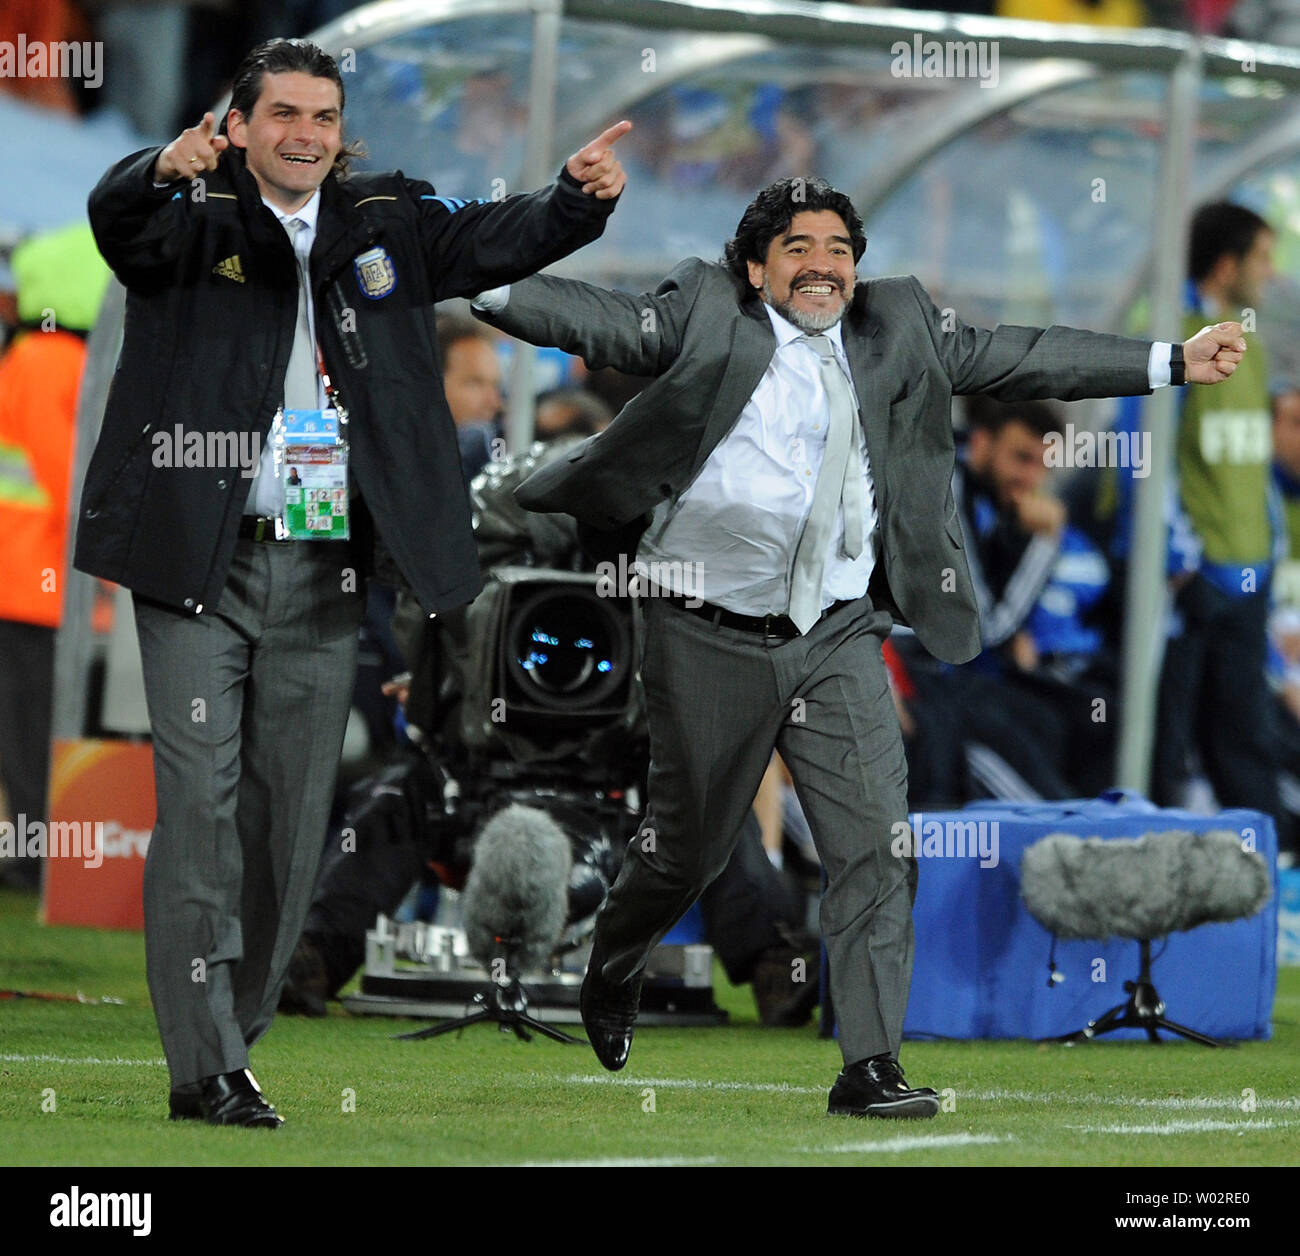 Argentina manager Diego Maradona celebrates his side's second goal during the Group B match at the Peter Mokaba Stadium in Polokwane, South Africa on June 22, 2010. UPI/Chris Brunskill Stock Photo